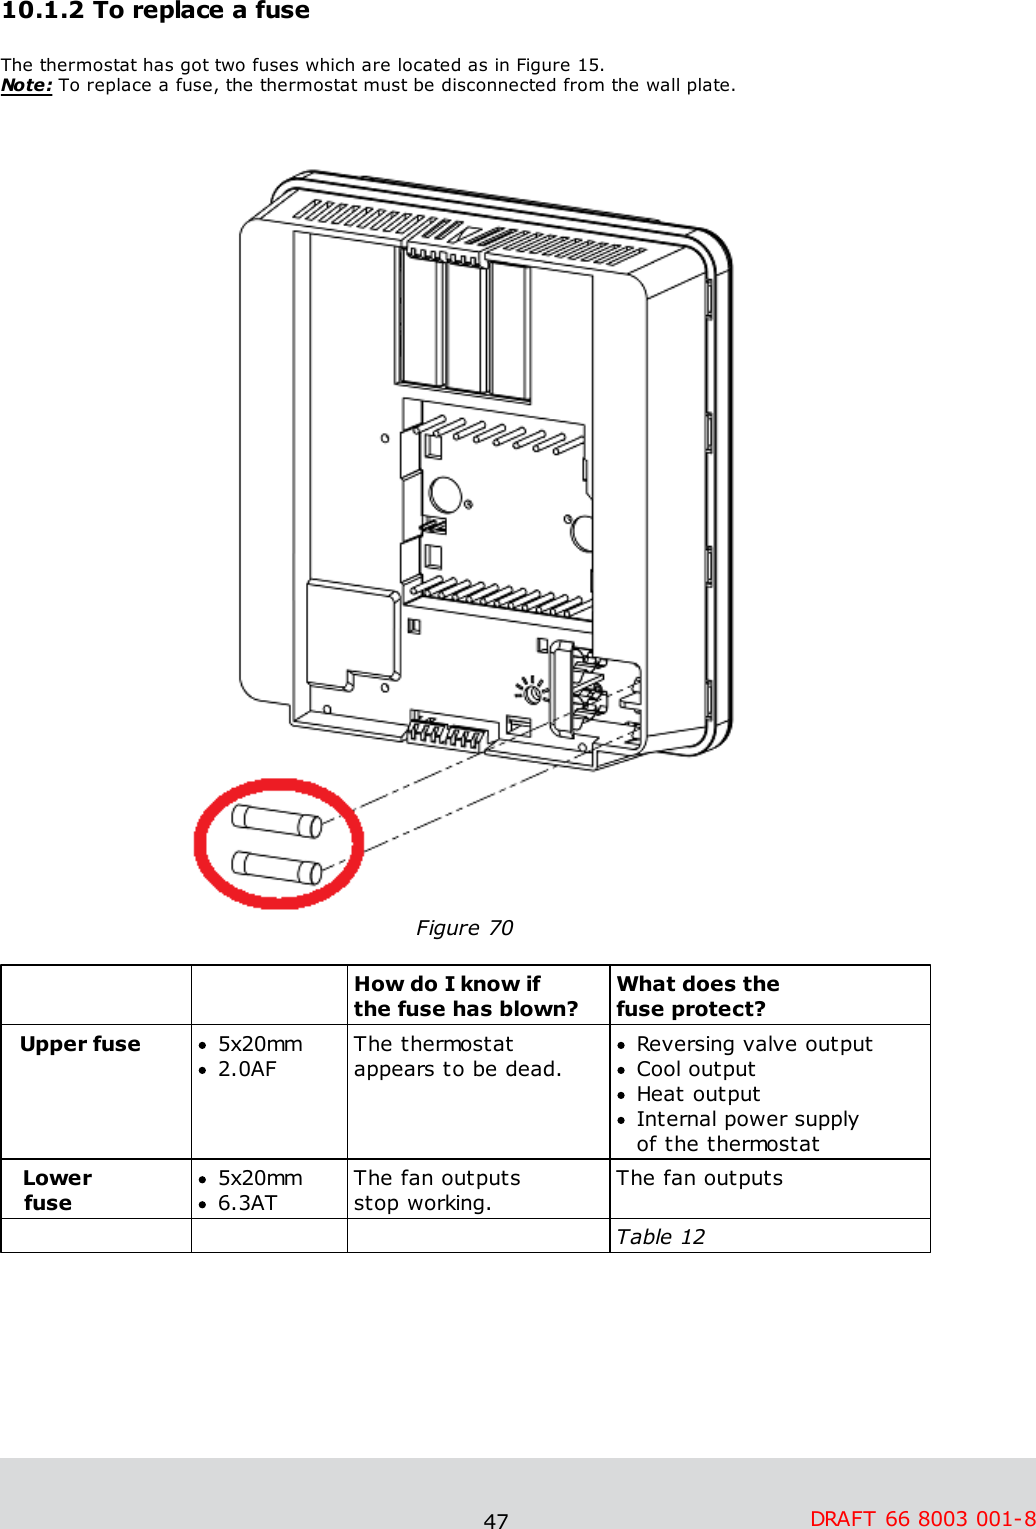 47 DRAFT 66 8003 001-810.1.2 To replace a fuseThe thermostat has got two fuses which are located as in Figure 15. Note: To replace a fuse, the thermostat must be disconnected from the wall plate. Figure 70How do I know if the fuse has blown?What does the fuse protect?Upper fuse5x20mm2.0AFThe thermostat appears to be dead. Reversing valve outputCool outputHeat outputInternal power supply of the thermostatLowerfuse5x20mm6.3ATThe fan outputs stop working. The fan outputsTable 12